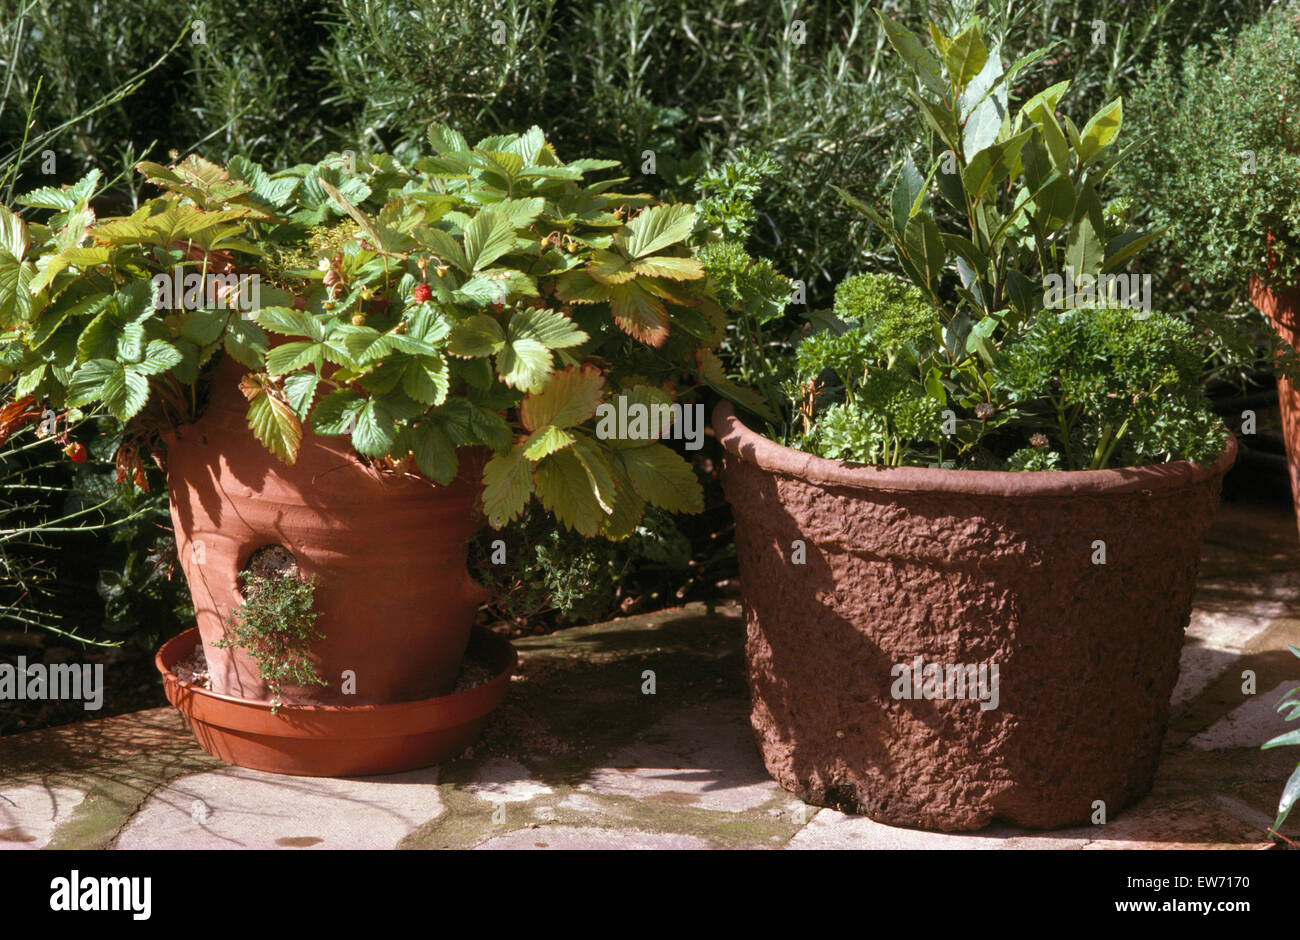 Close-up of strawberries and herbs in pots Stock Photo